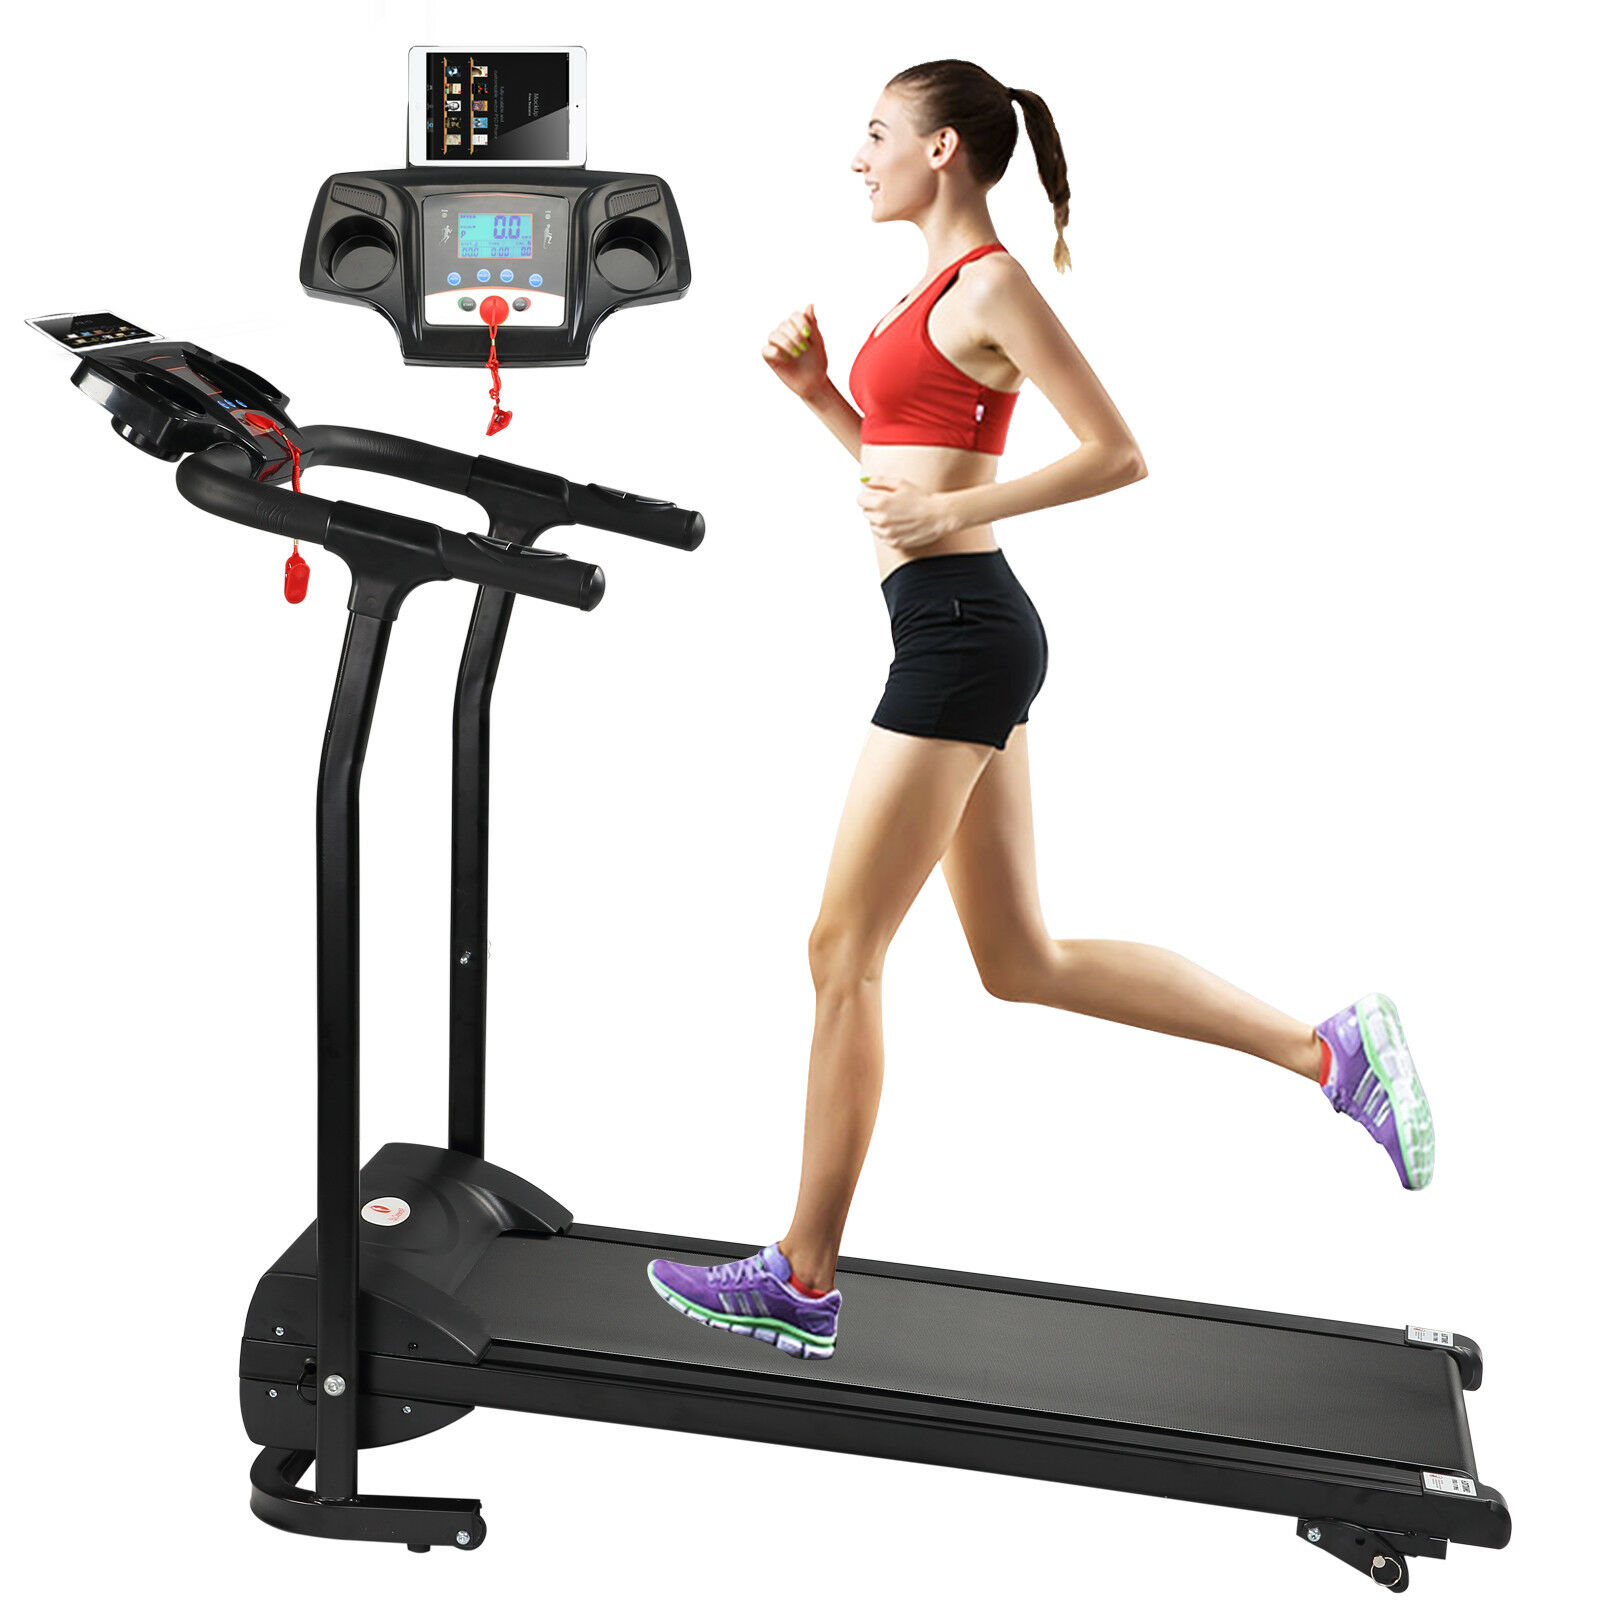 Folding Incline Electric Treadmill Running Motorized Exercise Fitness Machine